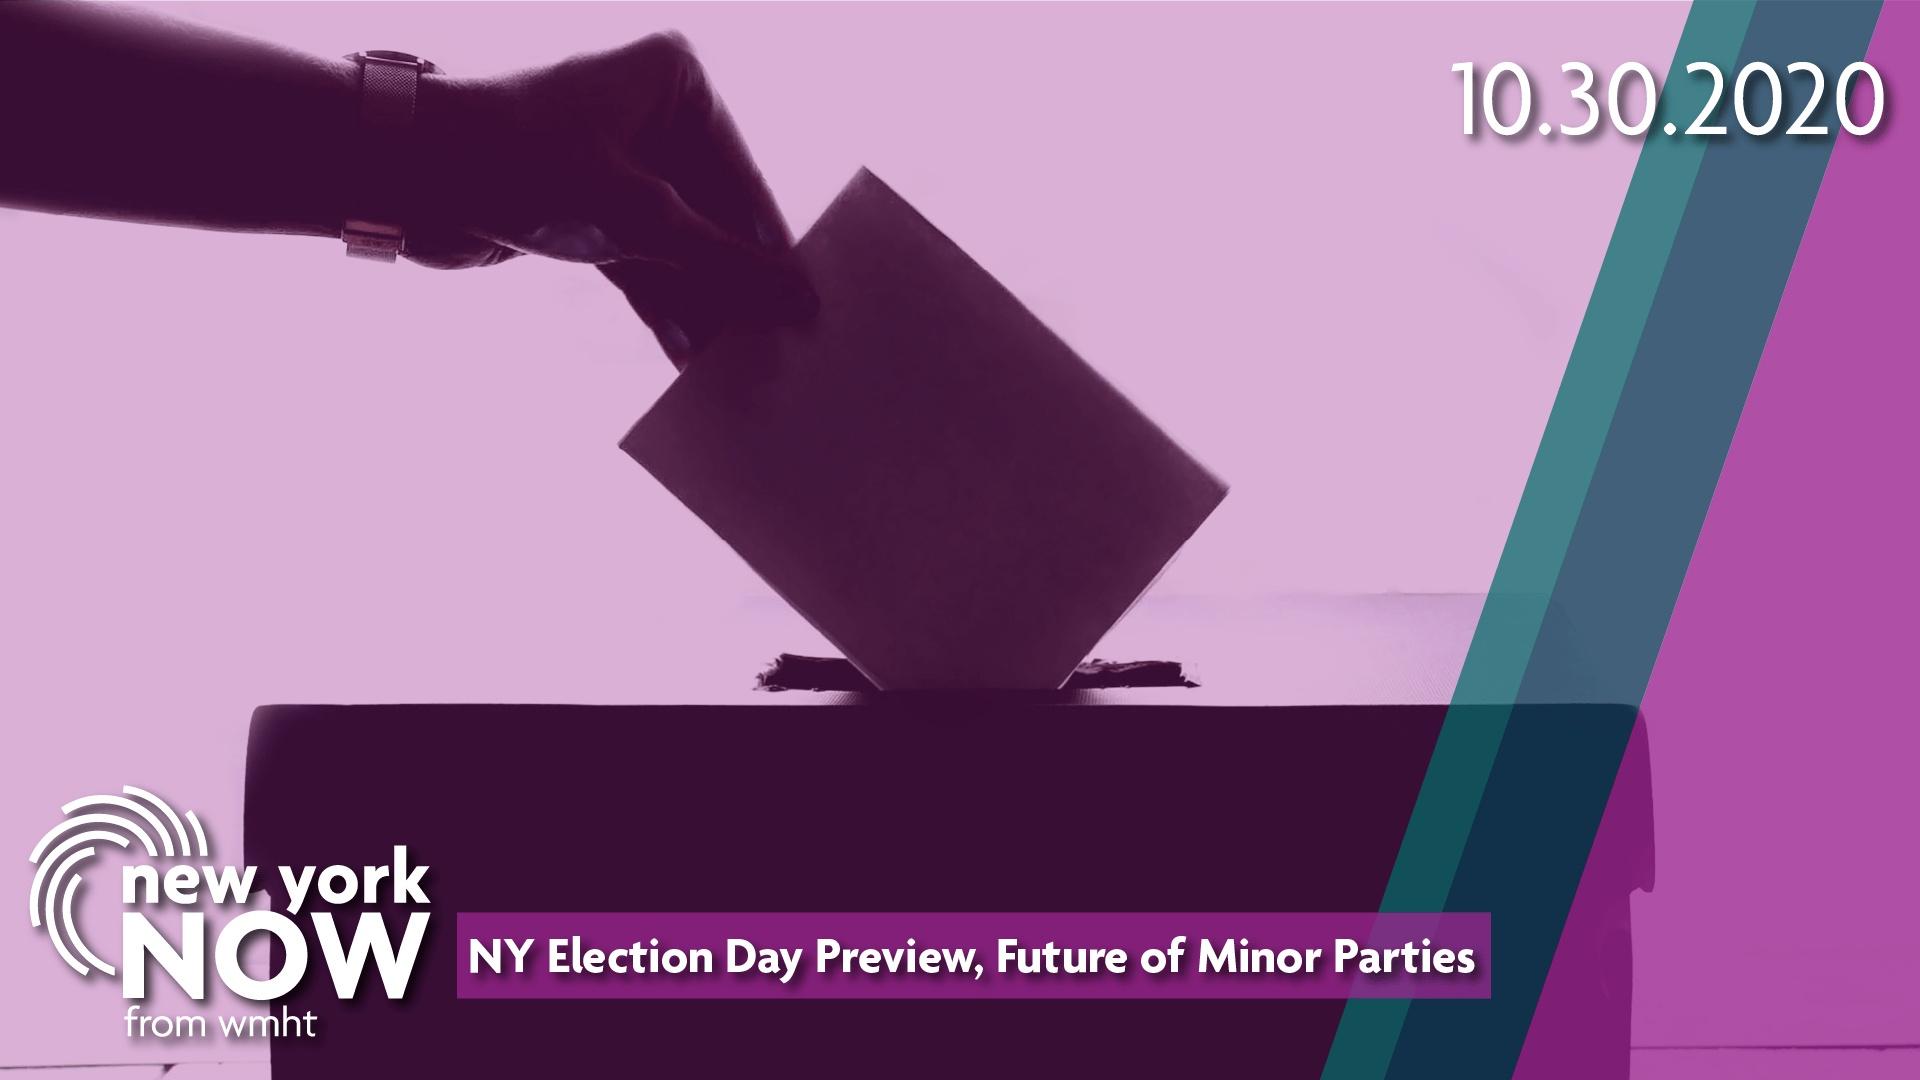 New York Election Day Preview, Future of Minor Parties New York NOW